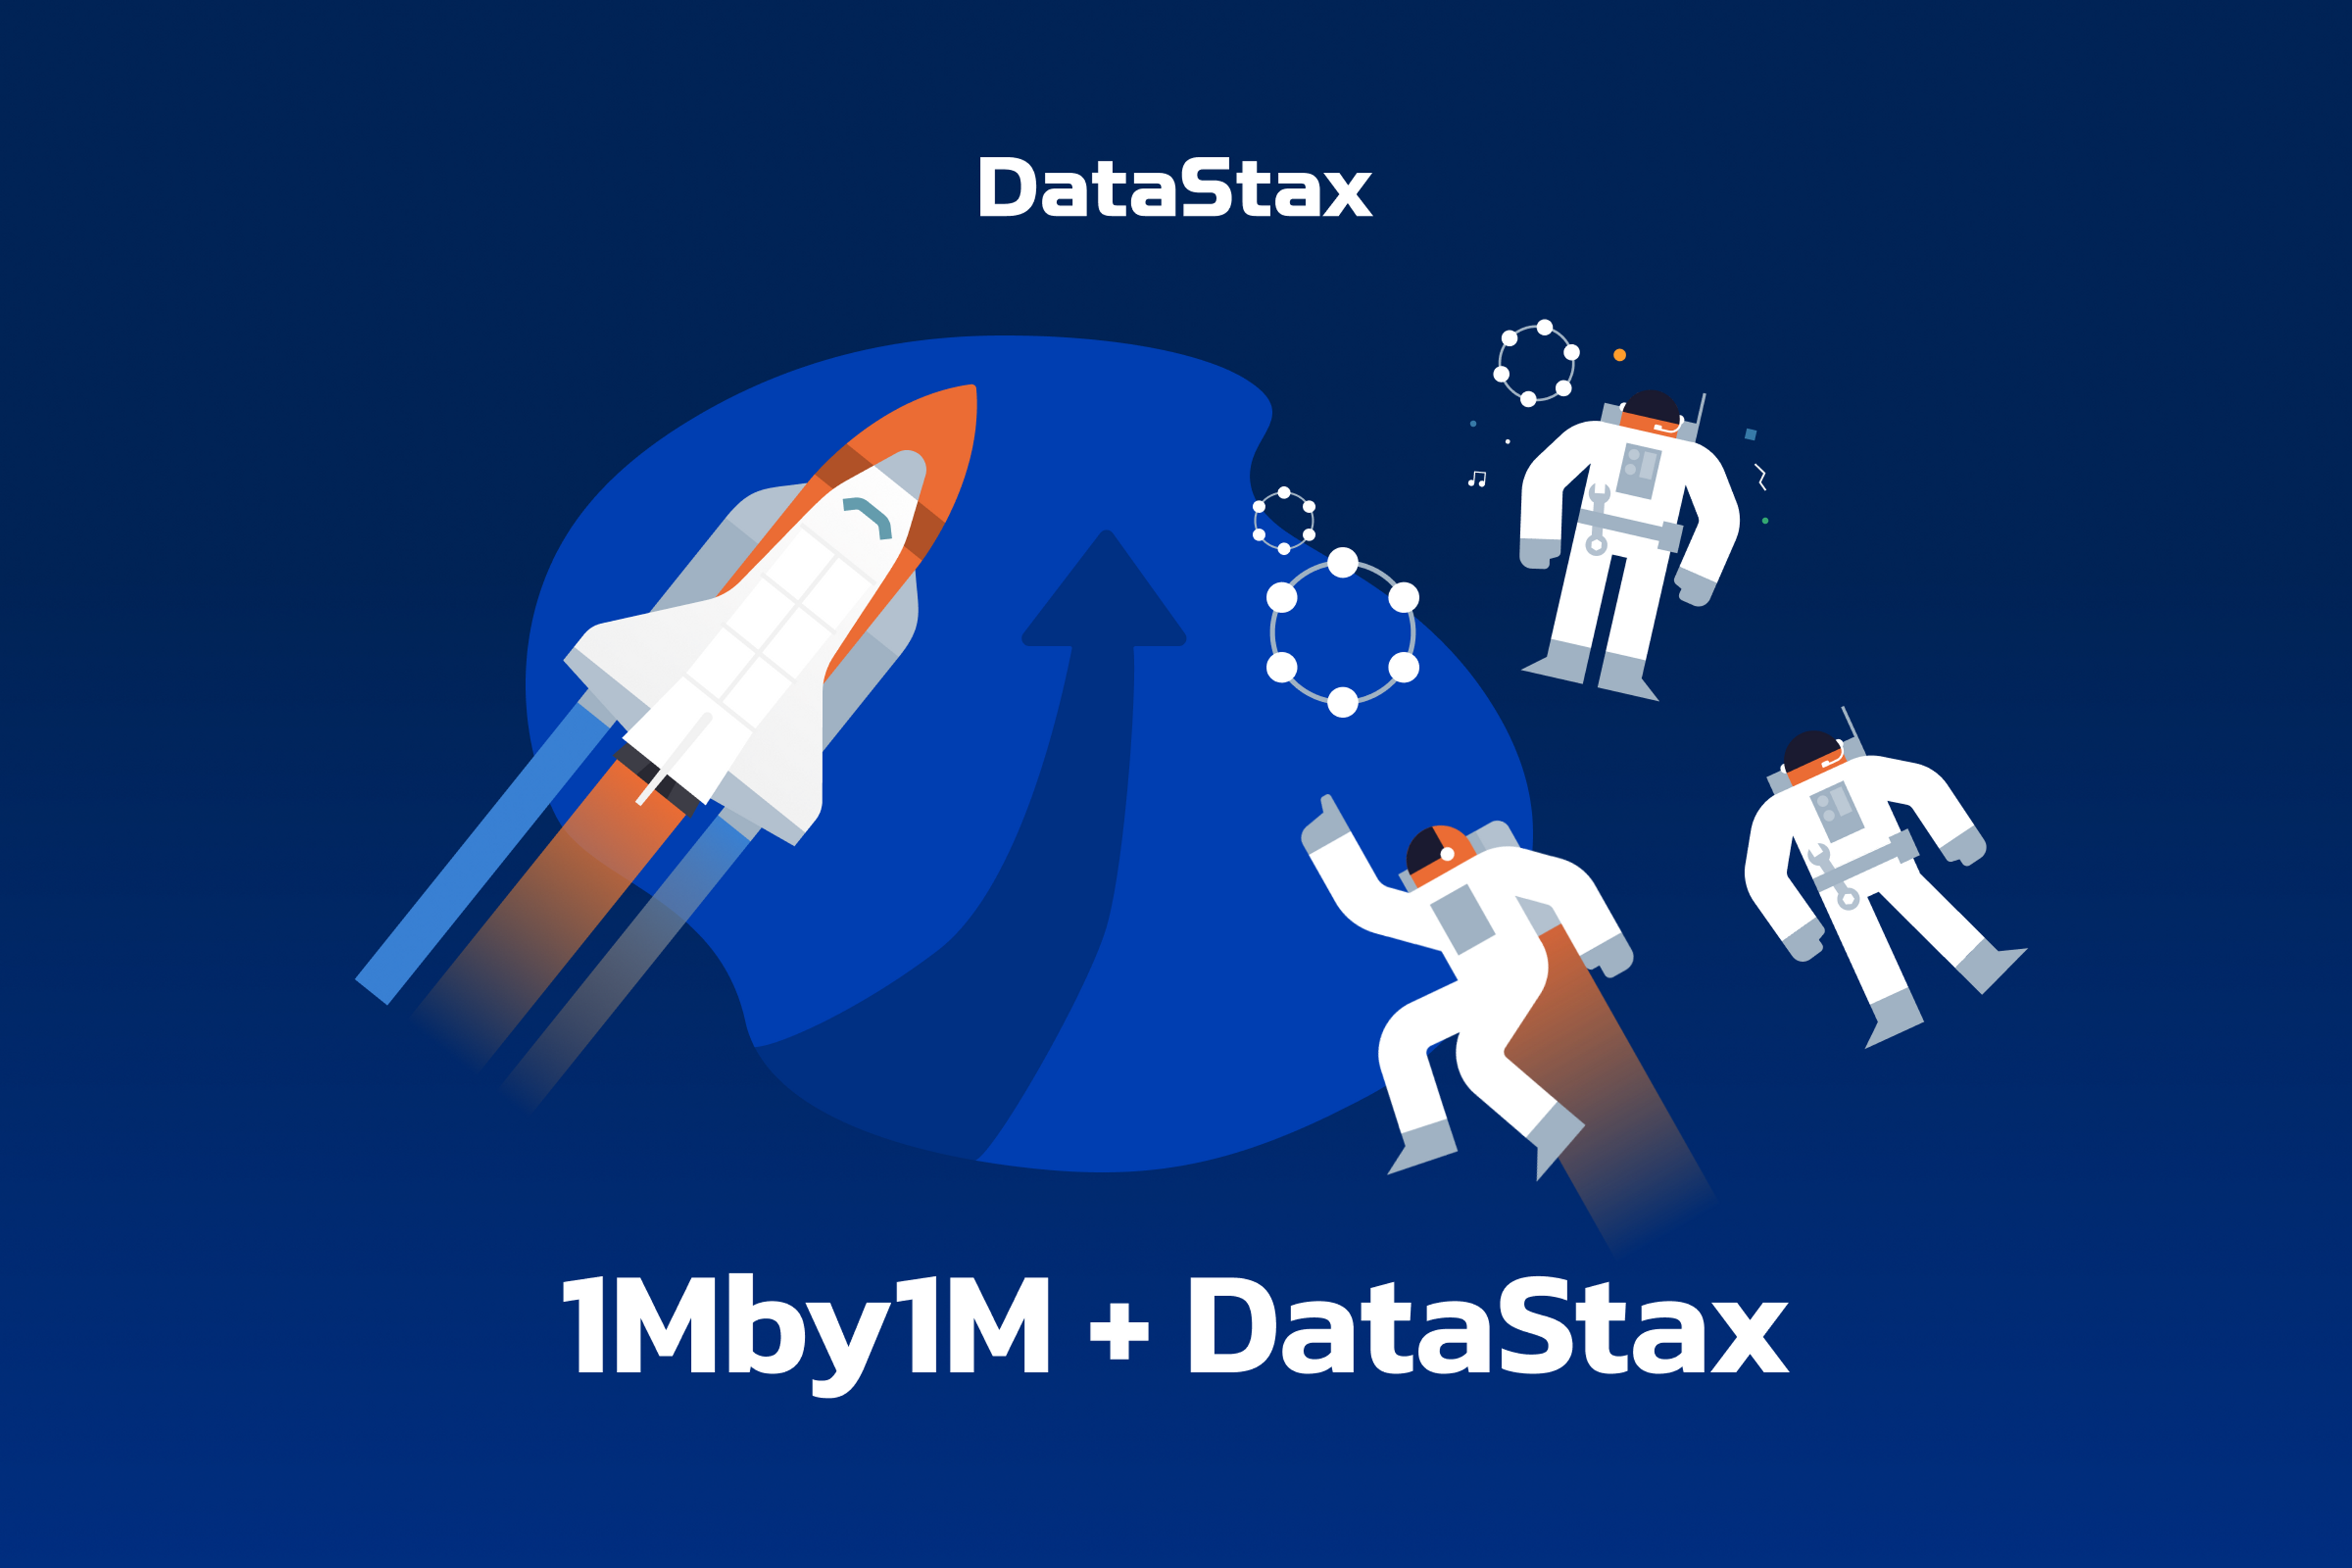 DataStax and 1M by 1M Kick-Off Global Virtual Startup Accelerator Challenge